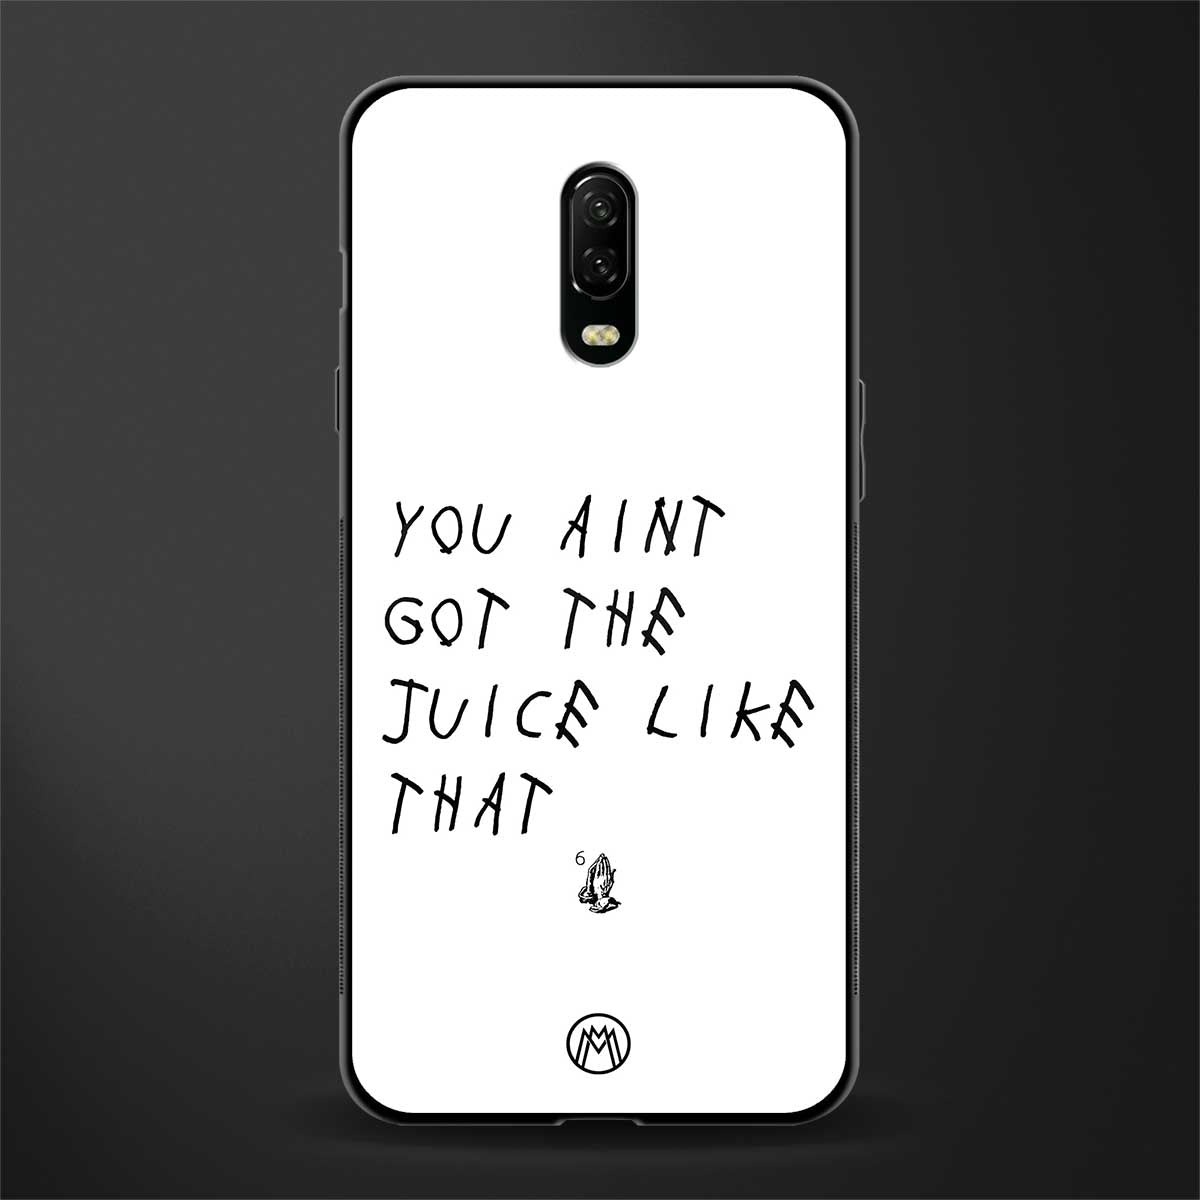 ain't got the juice white edition glass case for oneplus 6t image